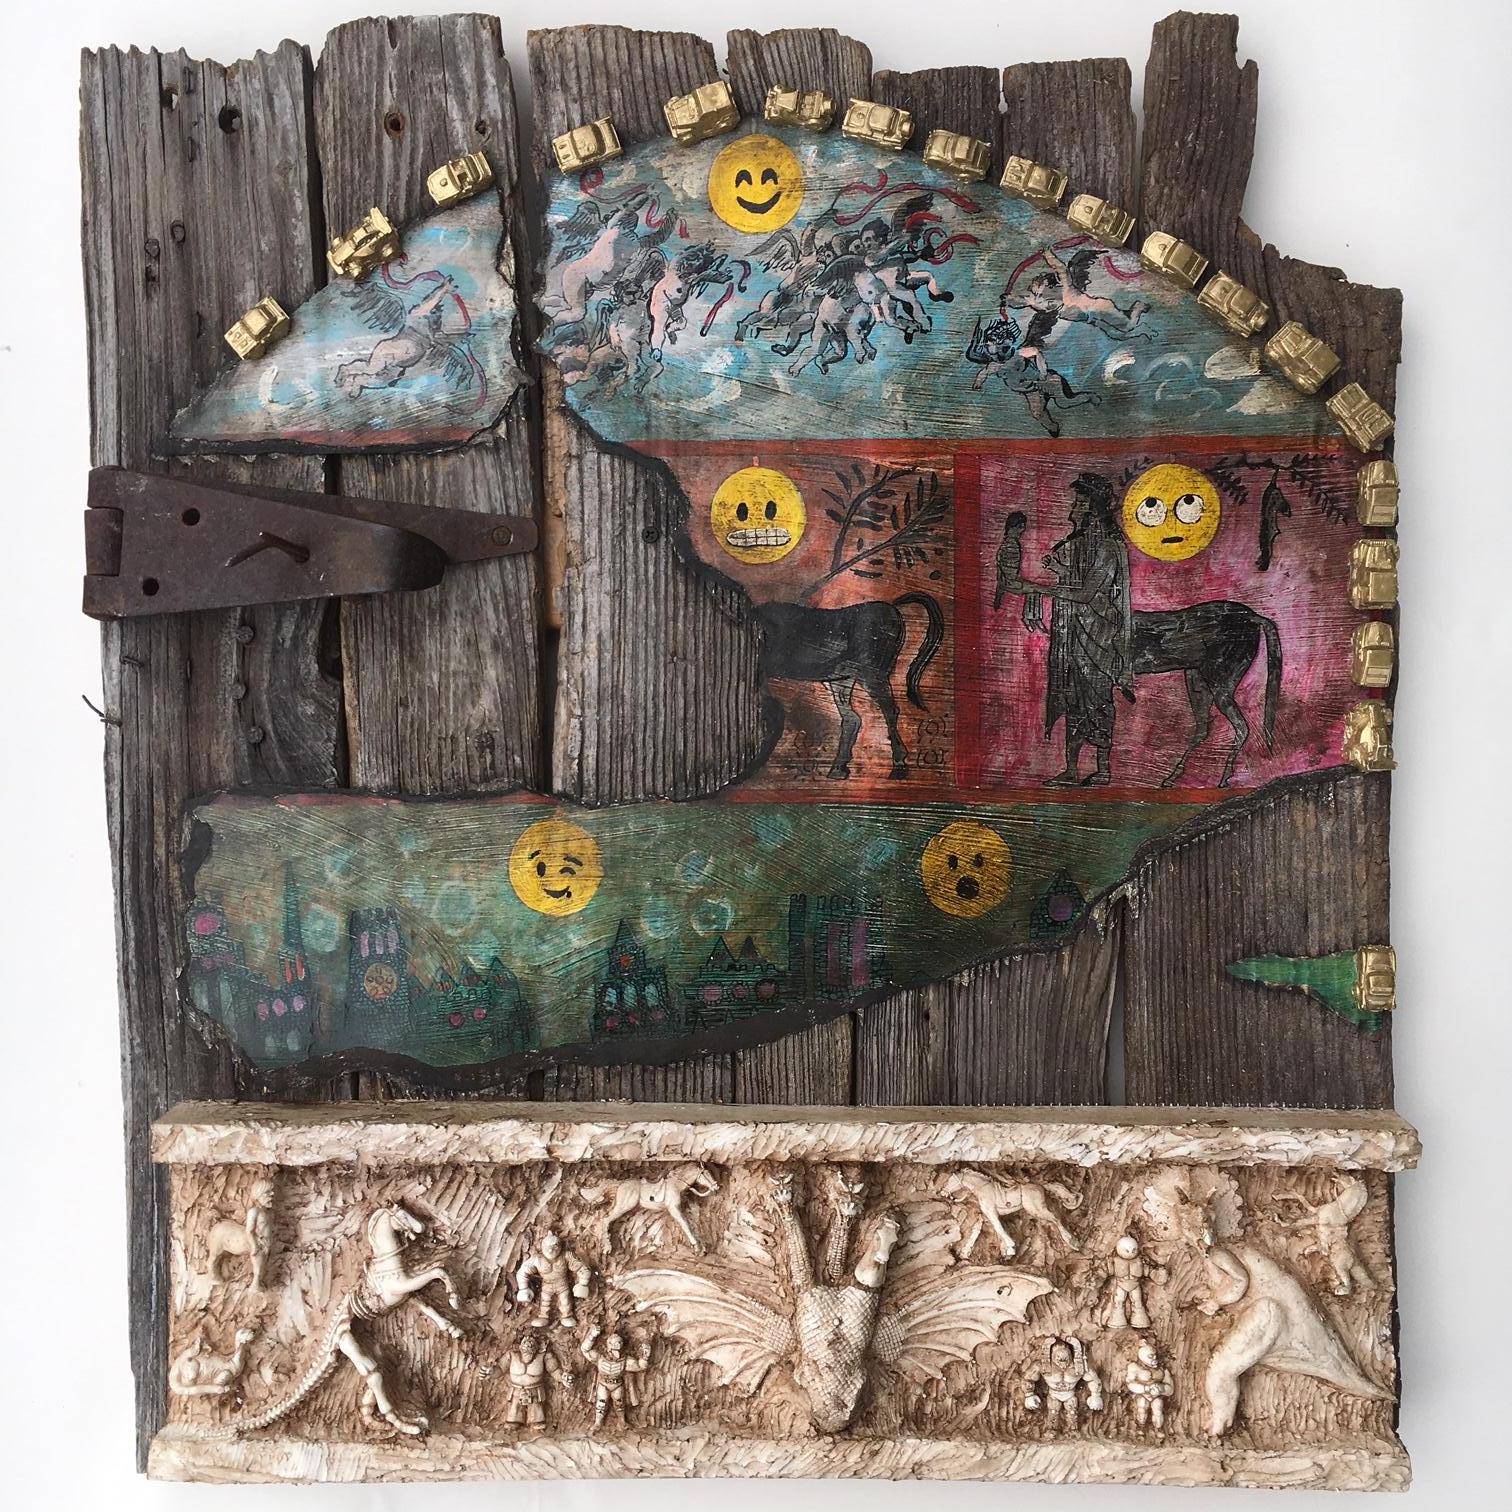 Painting & sculpture on old barn door: 'The Riddle of the Horse'